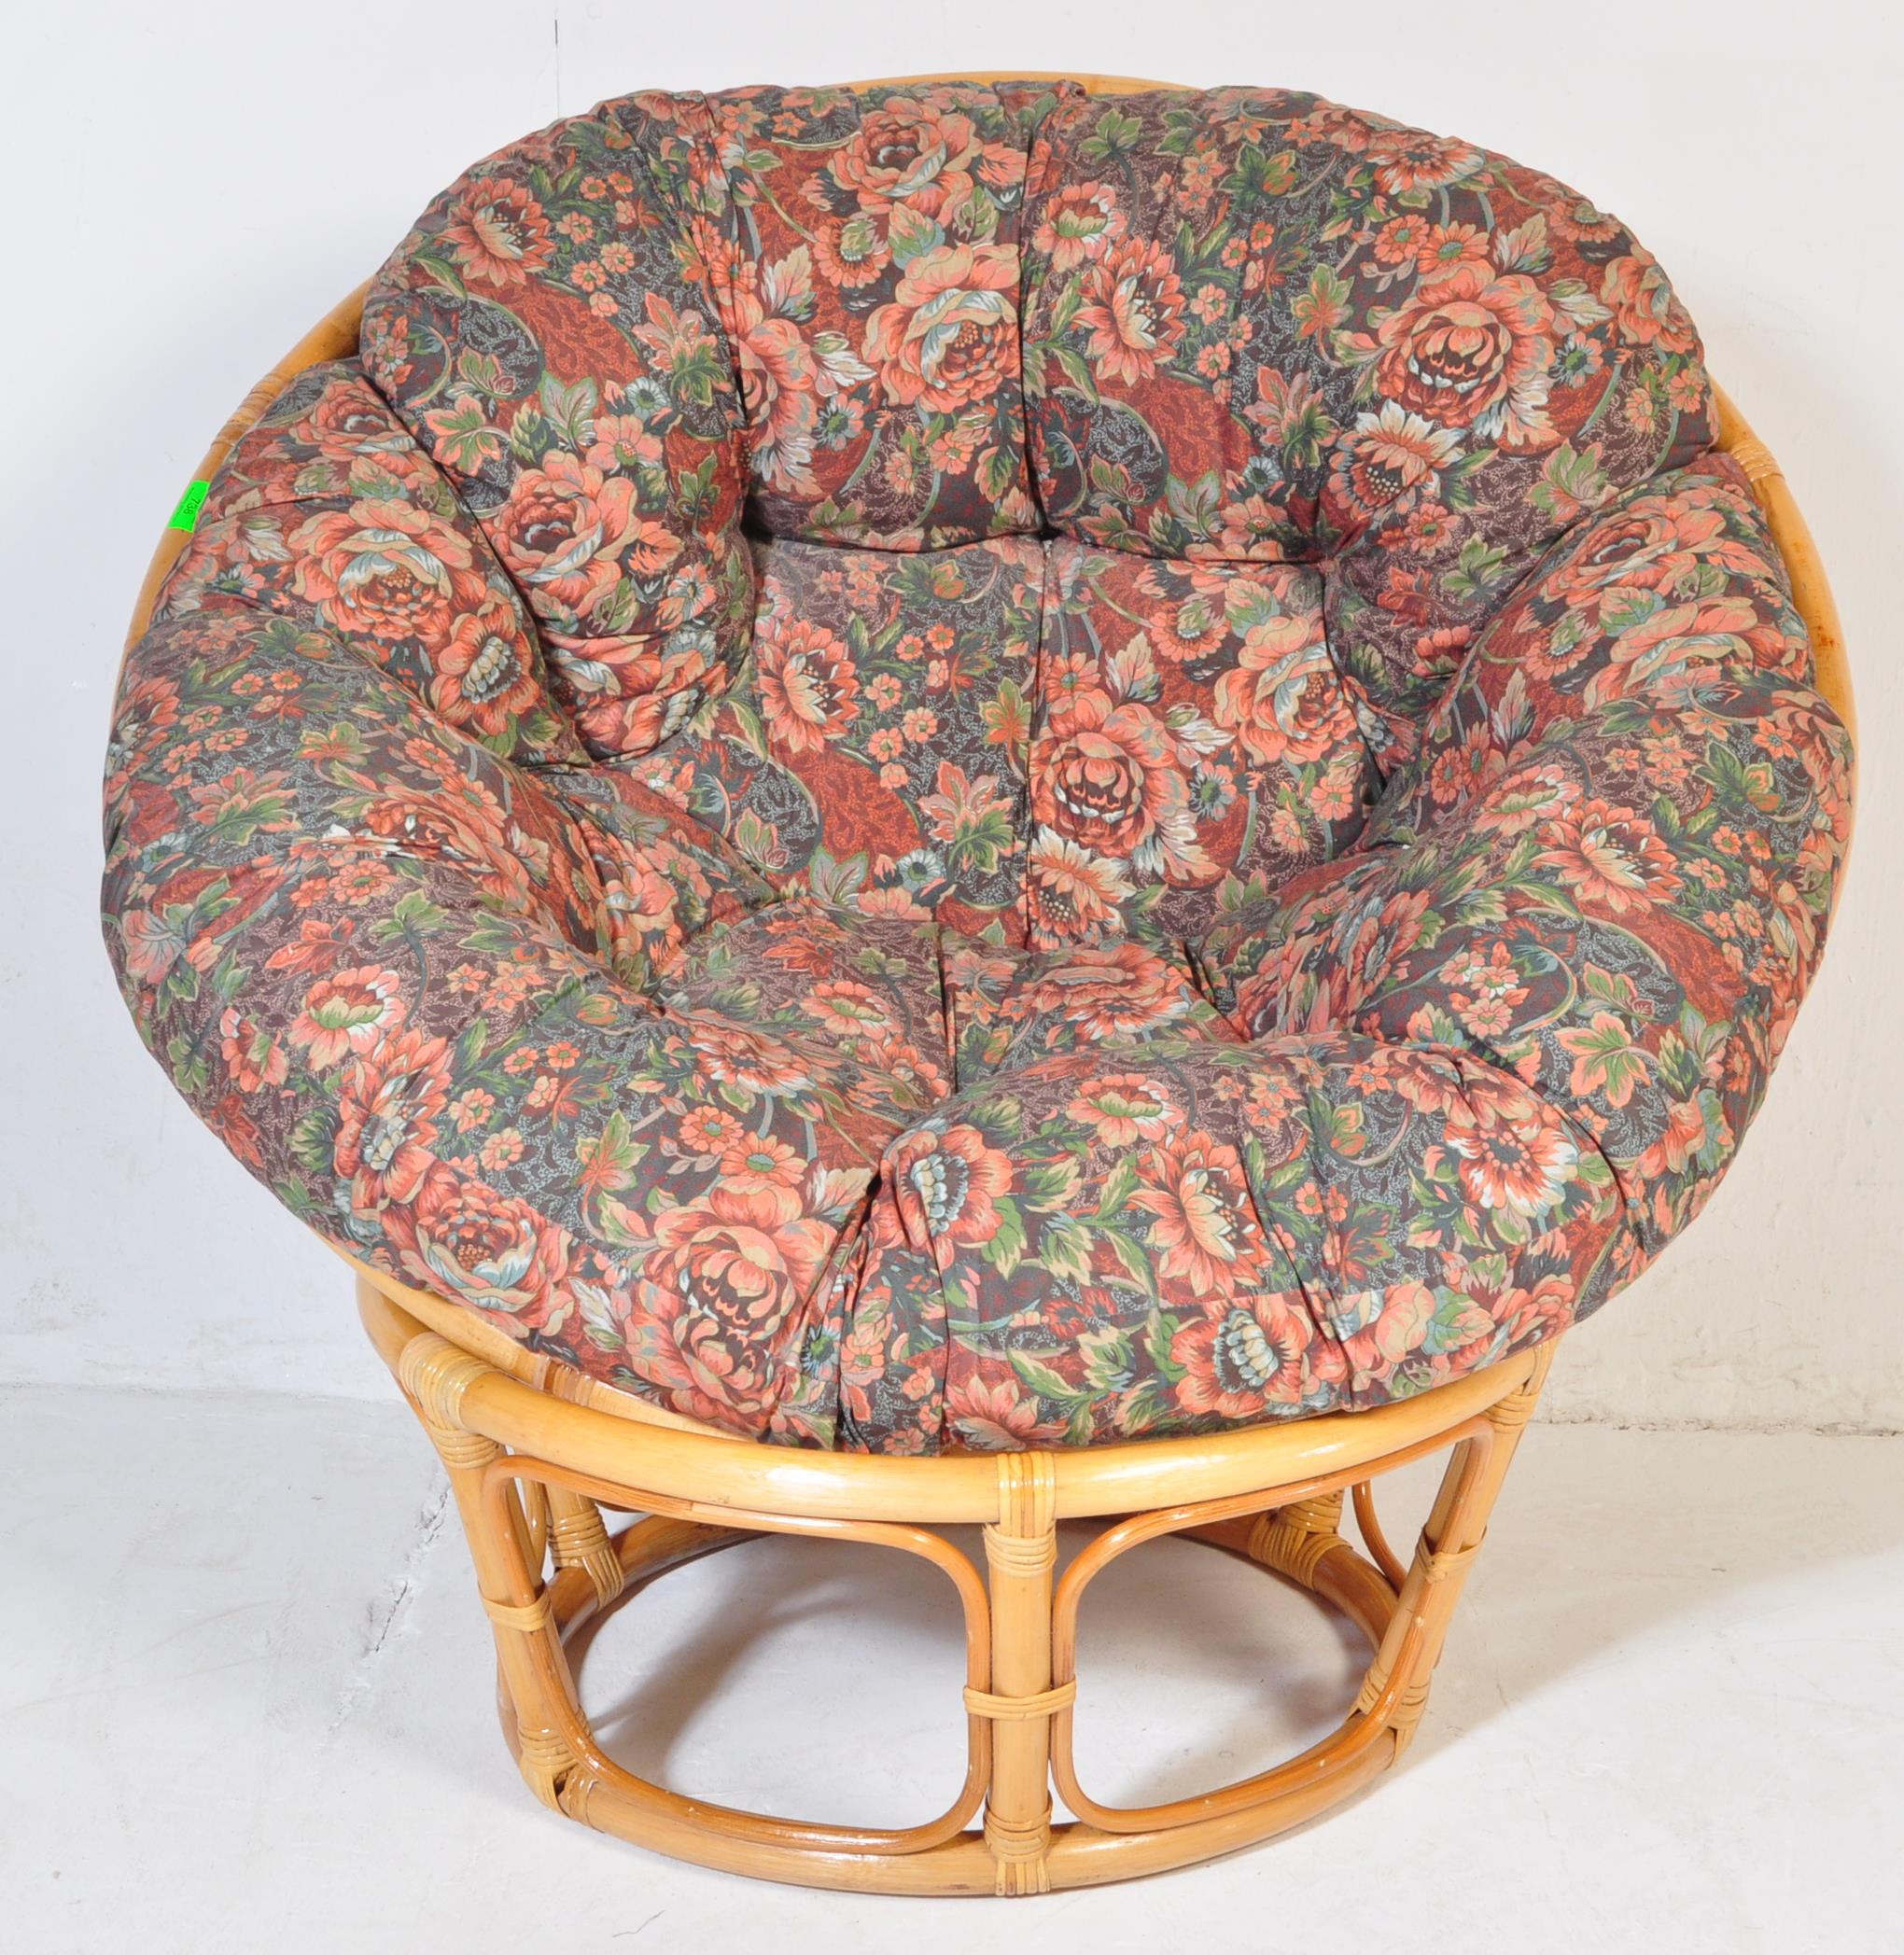 20TH CENTURY RETRO BAMBOO & RATTAN WEAVE EGG CHAIR - Image 3 of 4